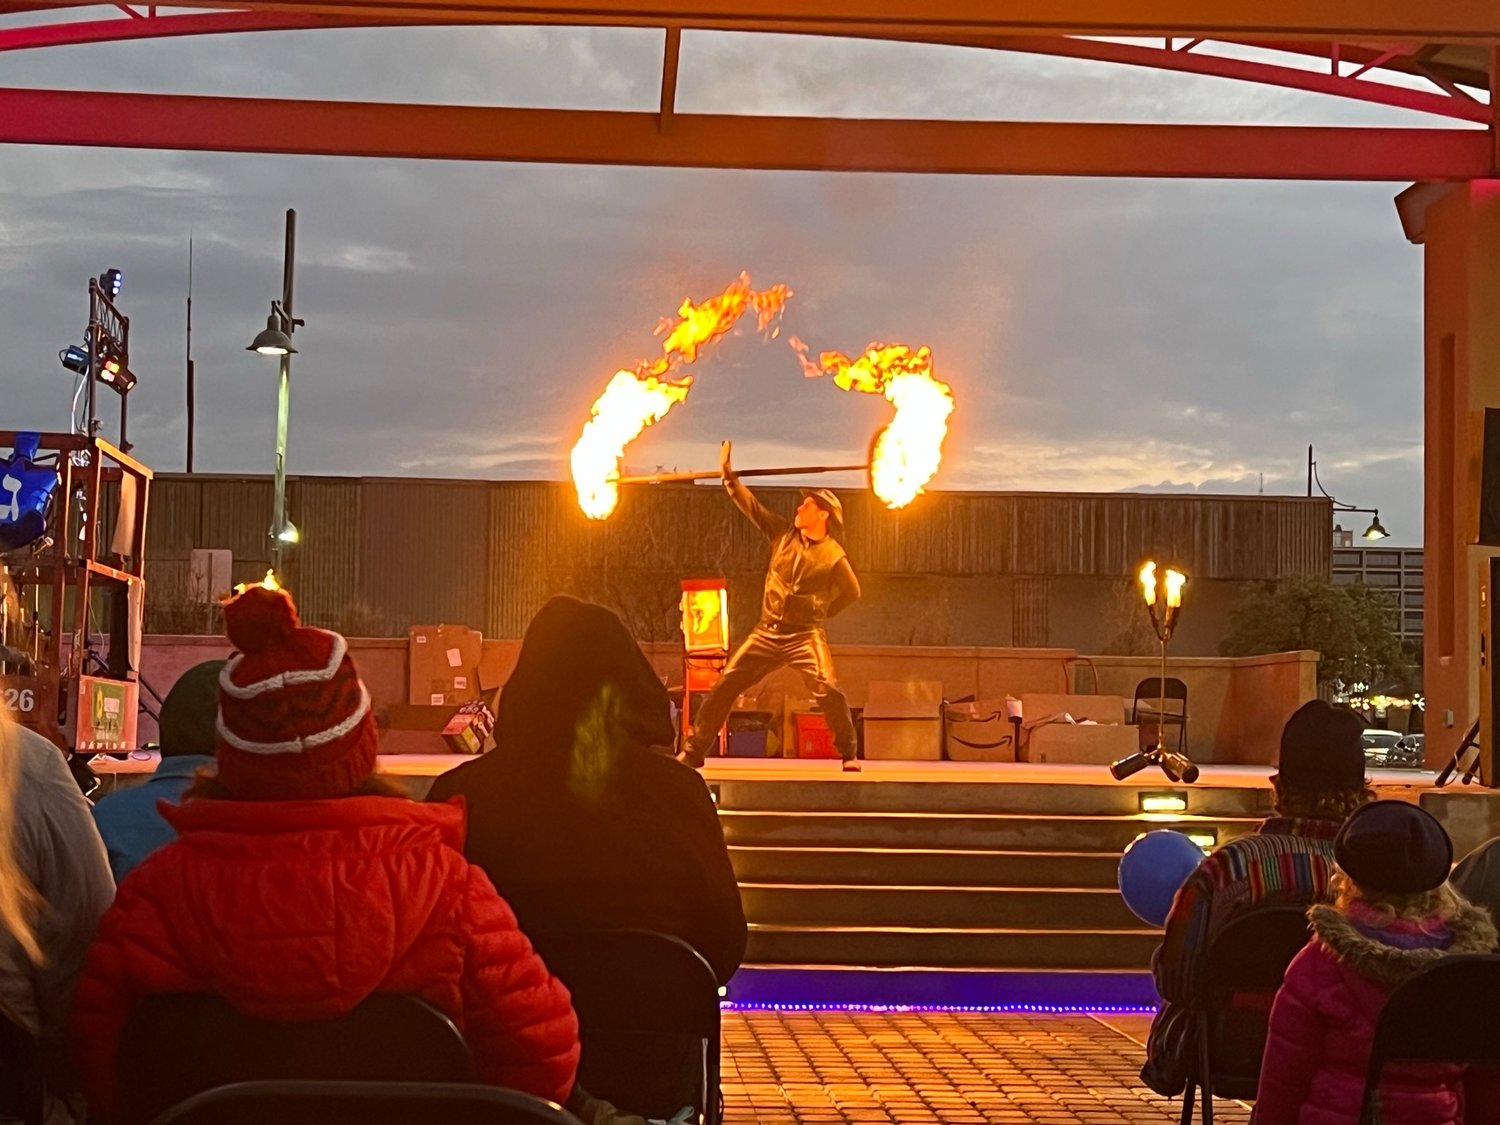 Fire dancers with ODD LAB provided a finalé highlight (literaly) with performances of flaming batons, swords and whips during MEGA Chanukah at Downtown Plaza de Las Cruces events Sunday, Dec. 19. Jesse James takes on some big fire as he demonstrates his skills.